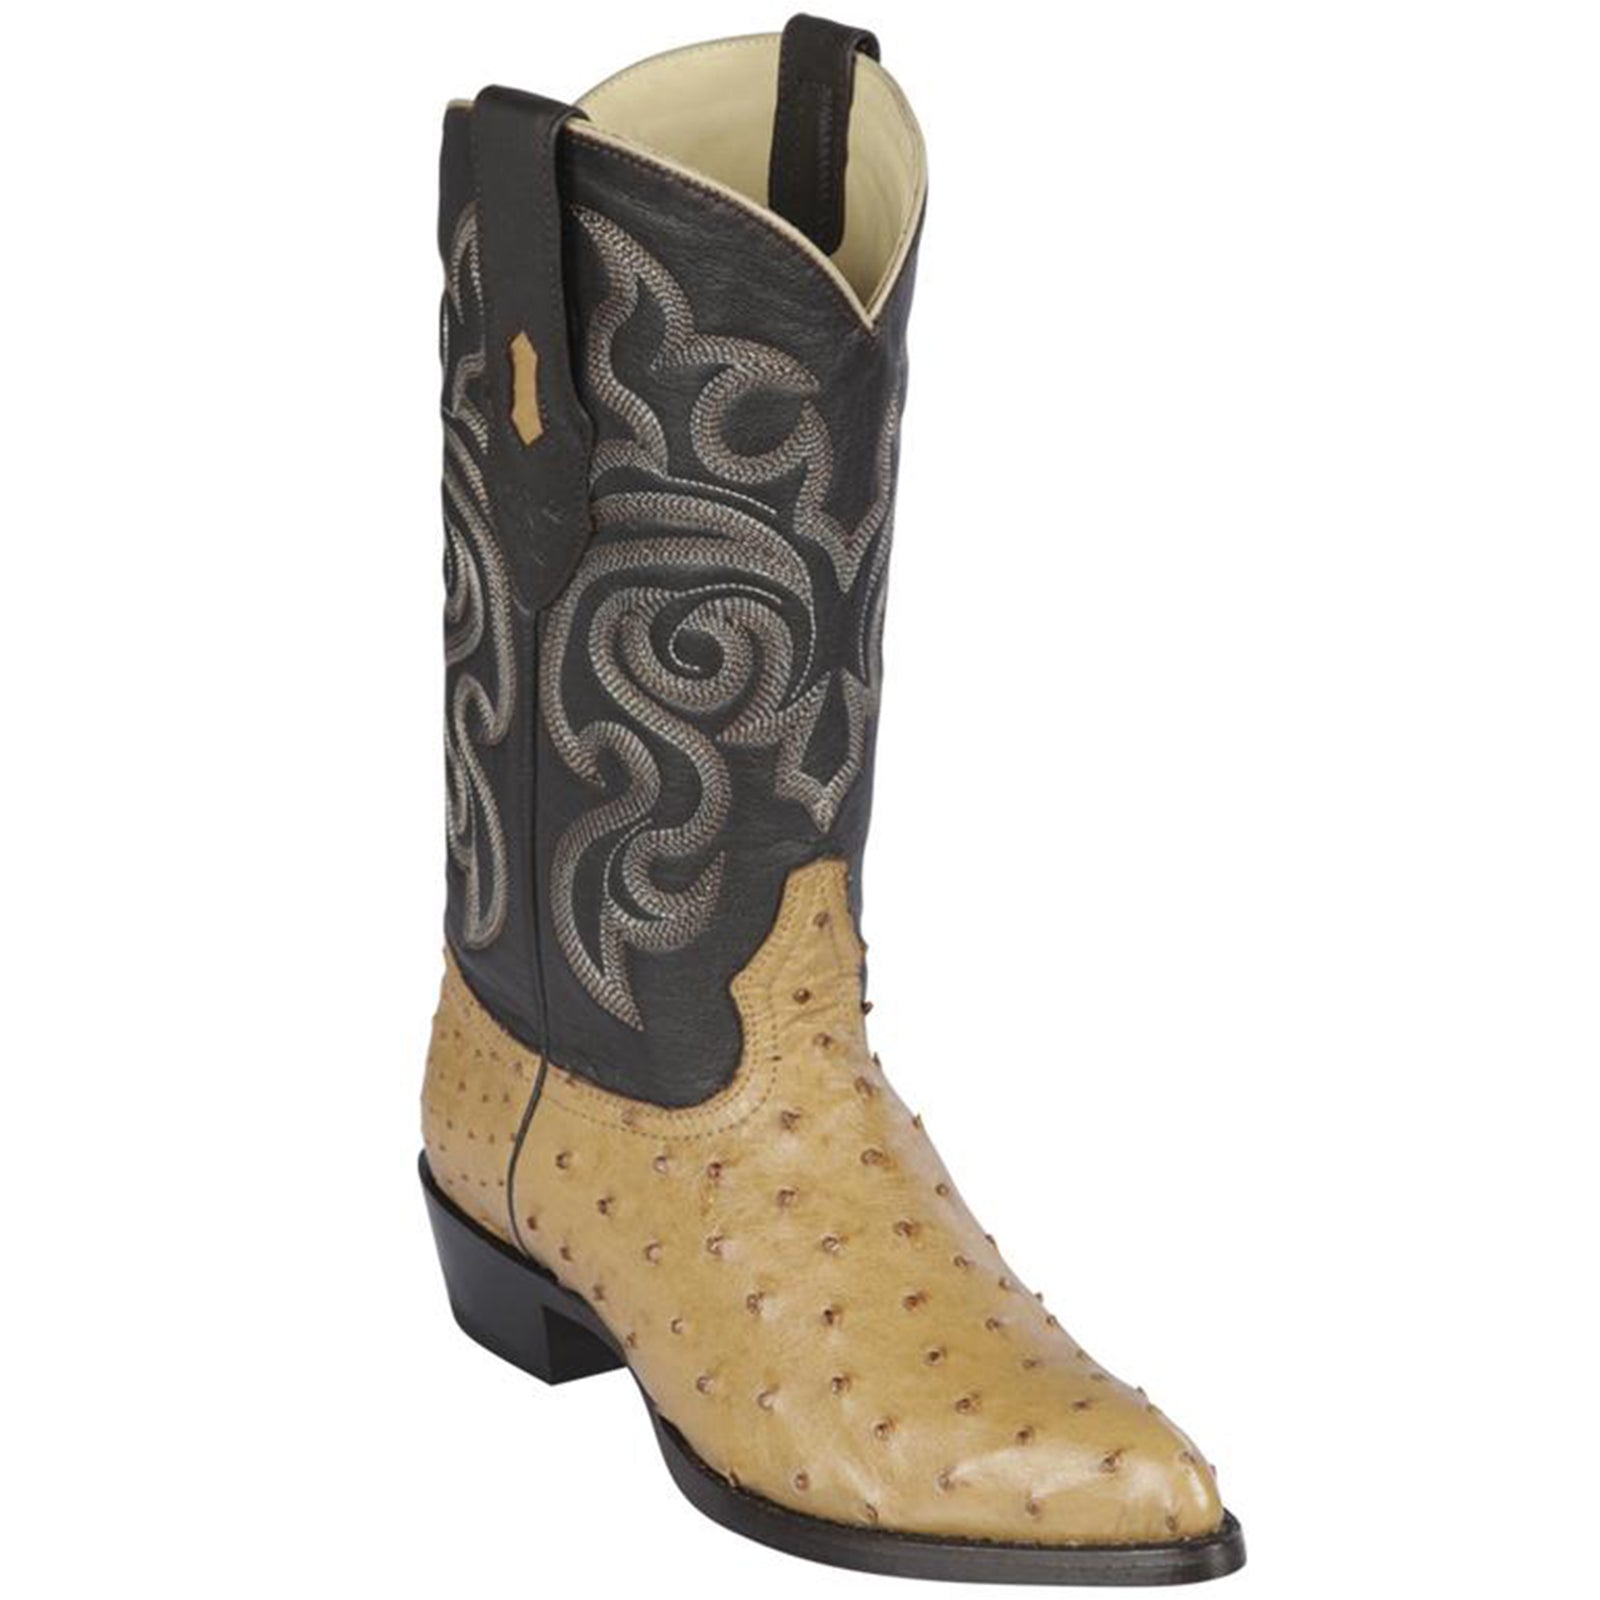 made in mexico cowboy boots Shop 